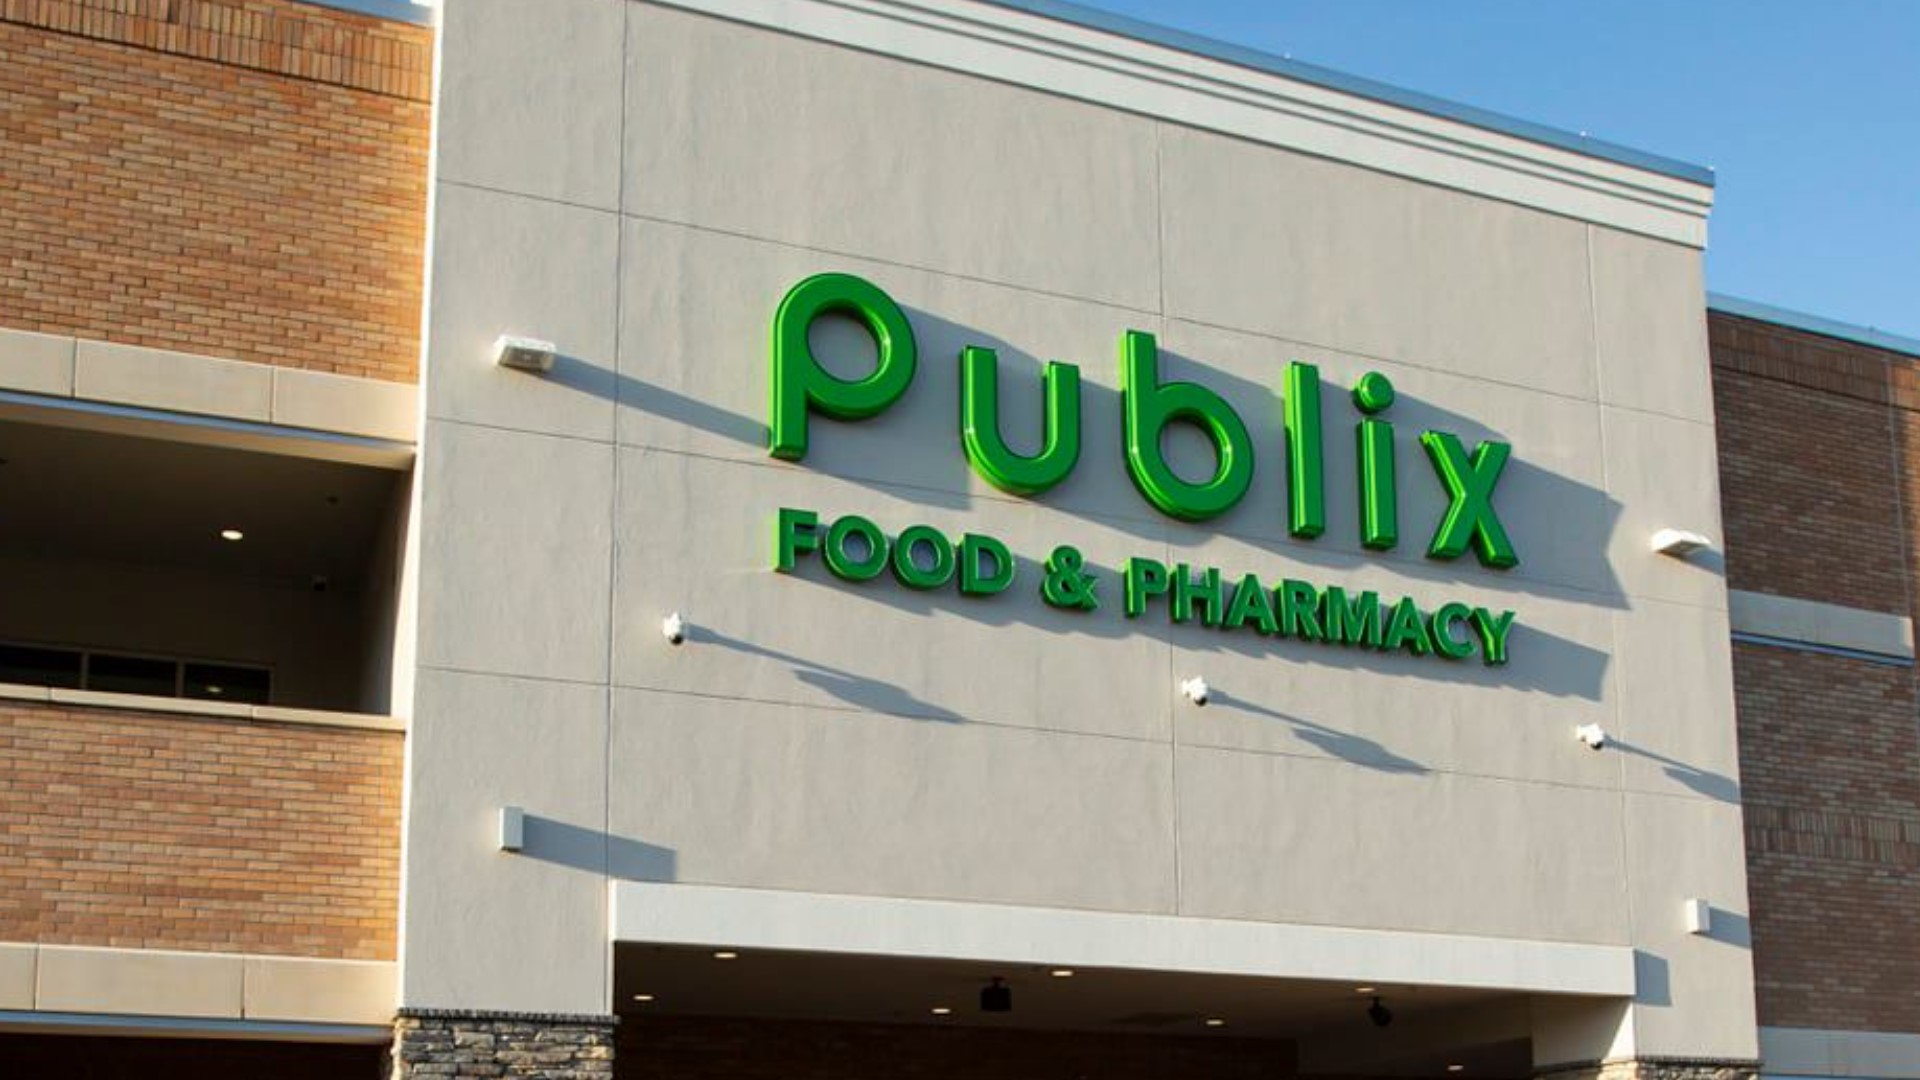 Publix is coming to Kentucky y'all!  The supermarket chain announced Tuesday, it has signed a lease for its first store in Kentucky-specifically Louisville.